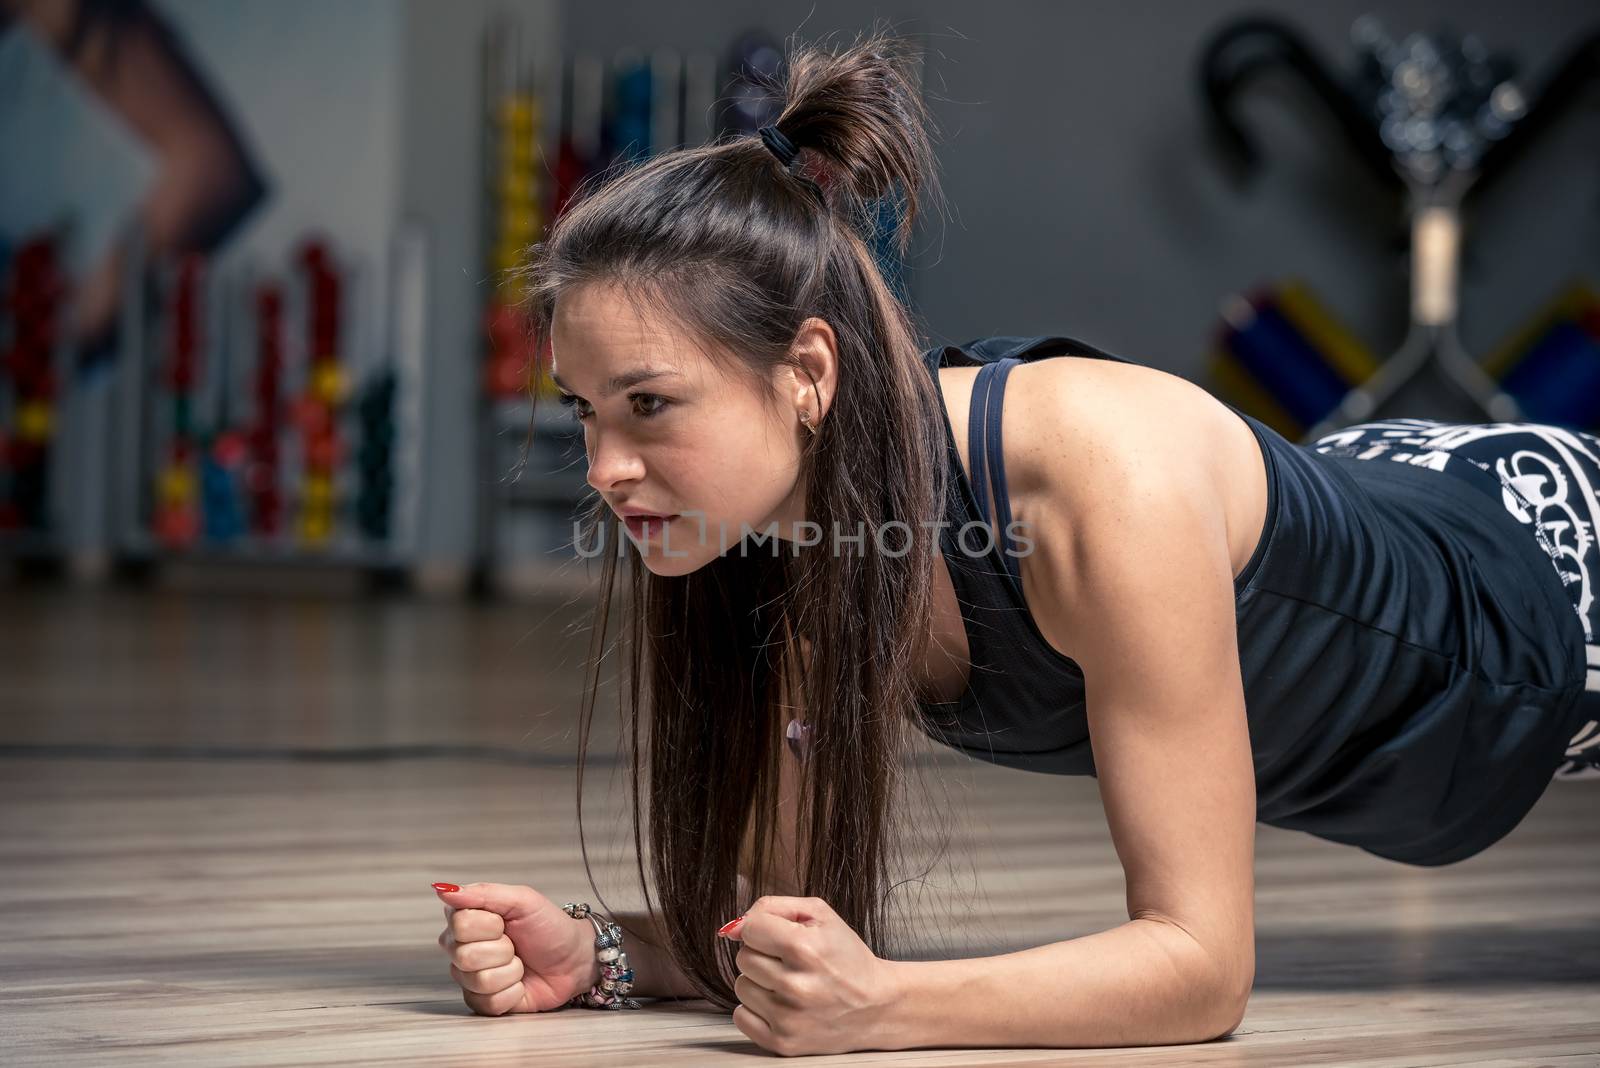 hardy woman performing an exercise strap on the floor in the gym by kosmsos111